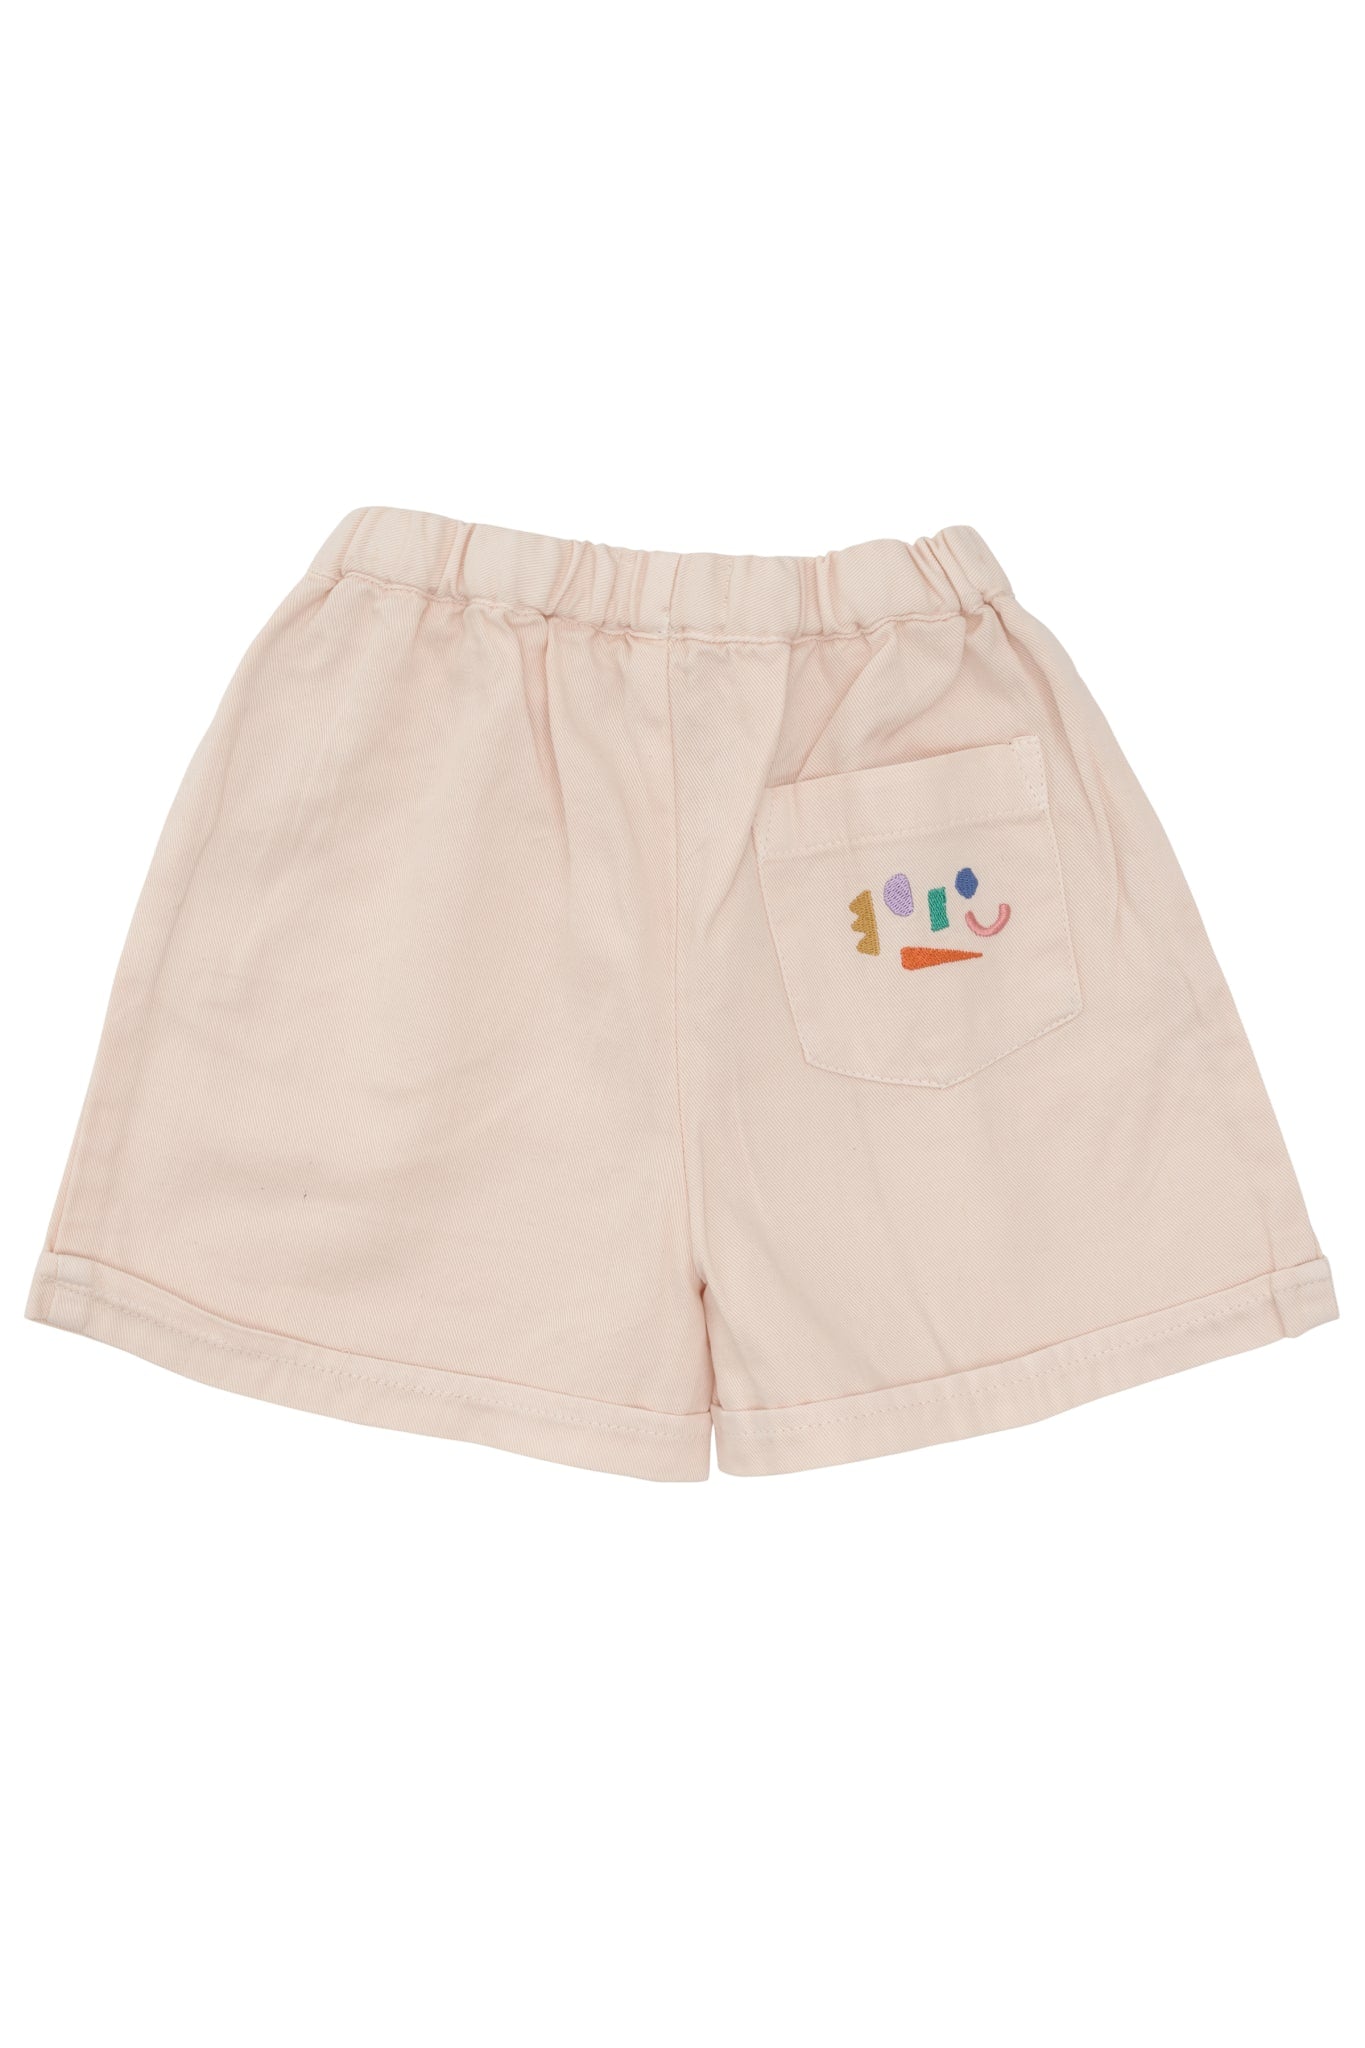 TWILL SHORTS W. EMBROIDERY - SOFT PINK